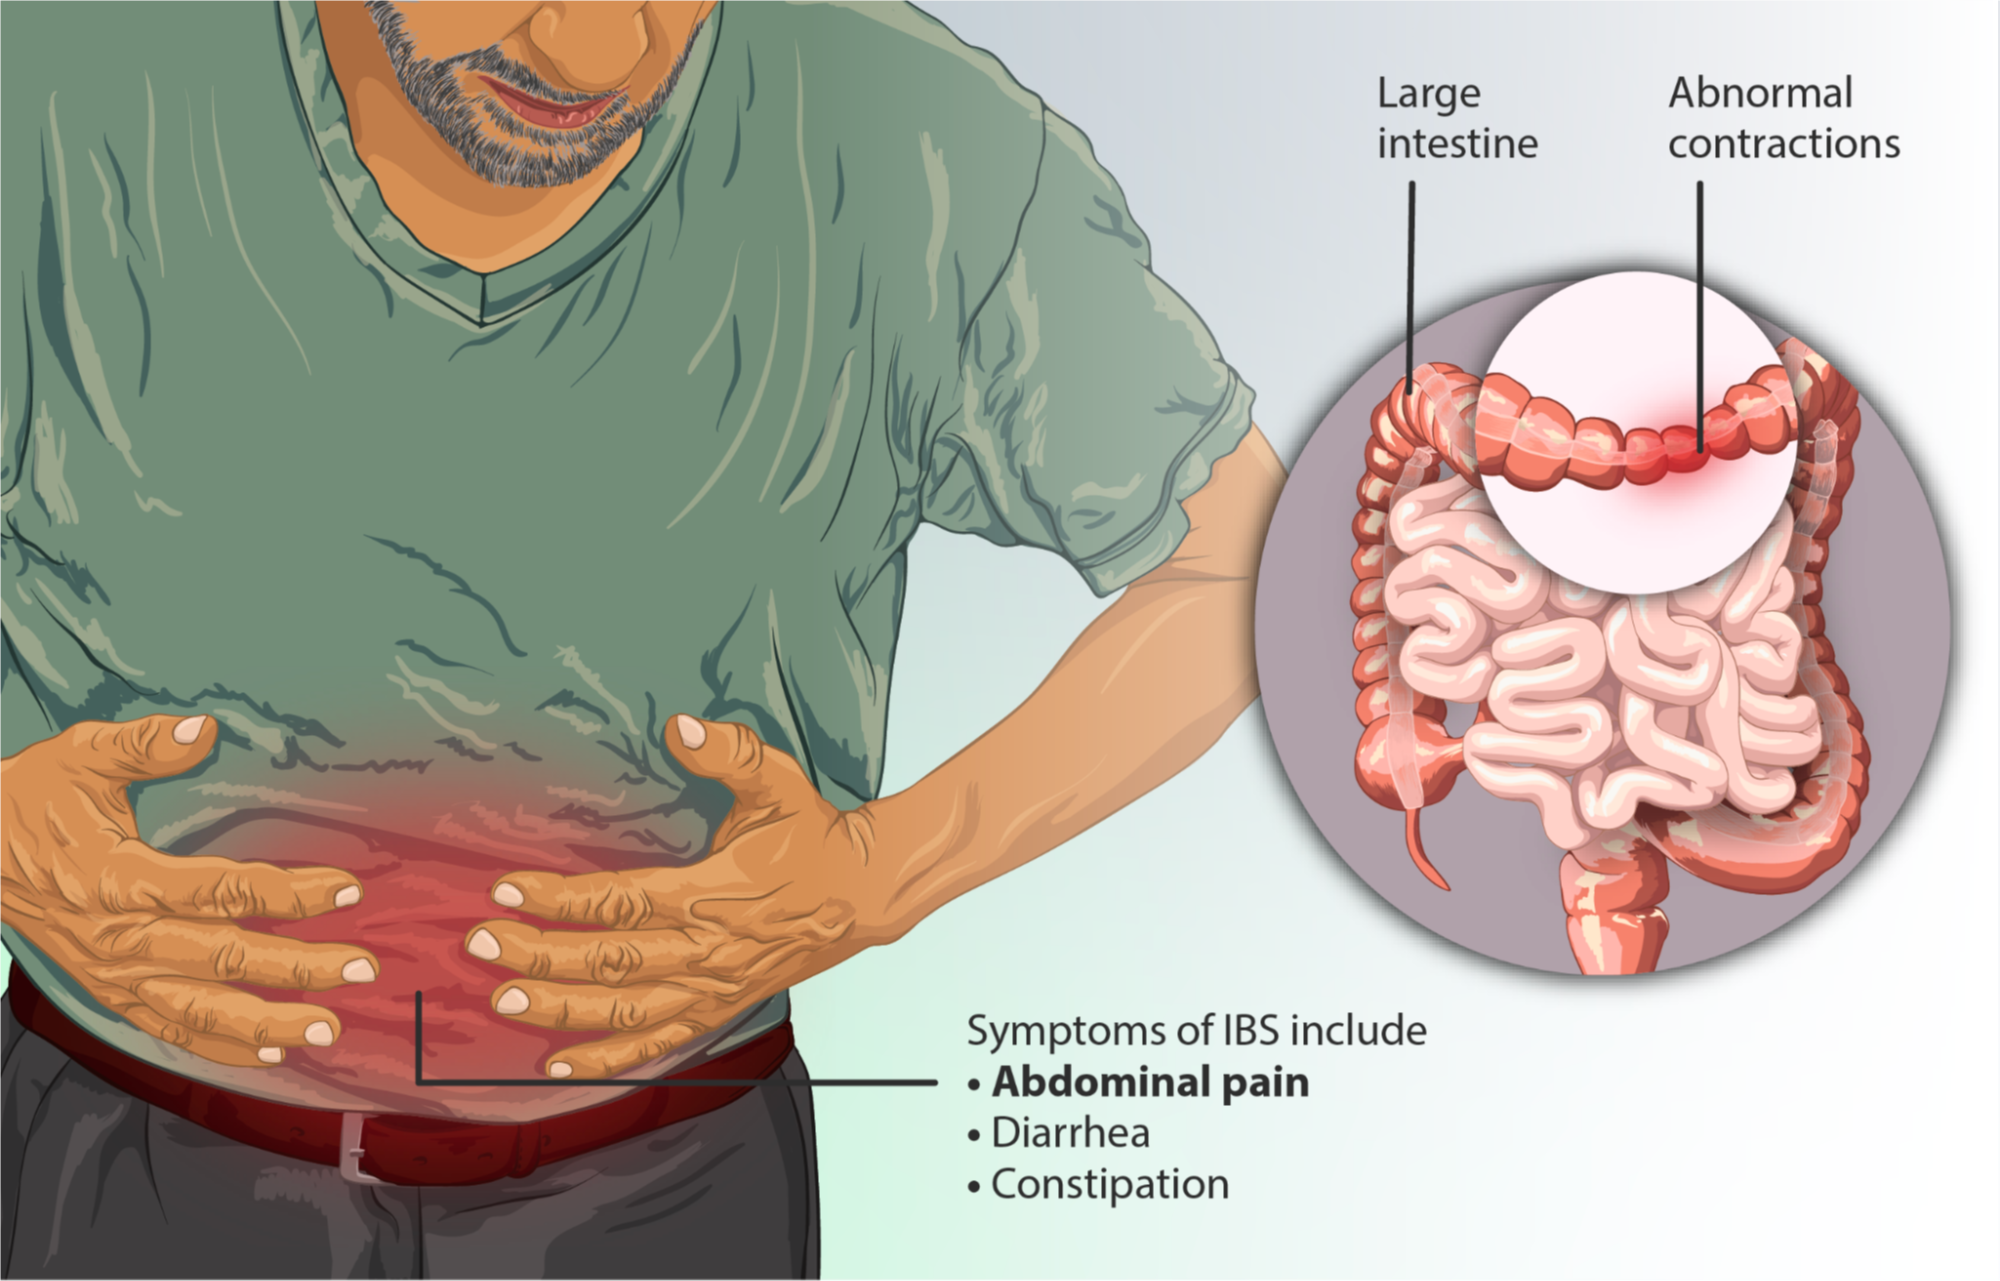 Recognizing IBS Symptoms - A Critical Step in Management